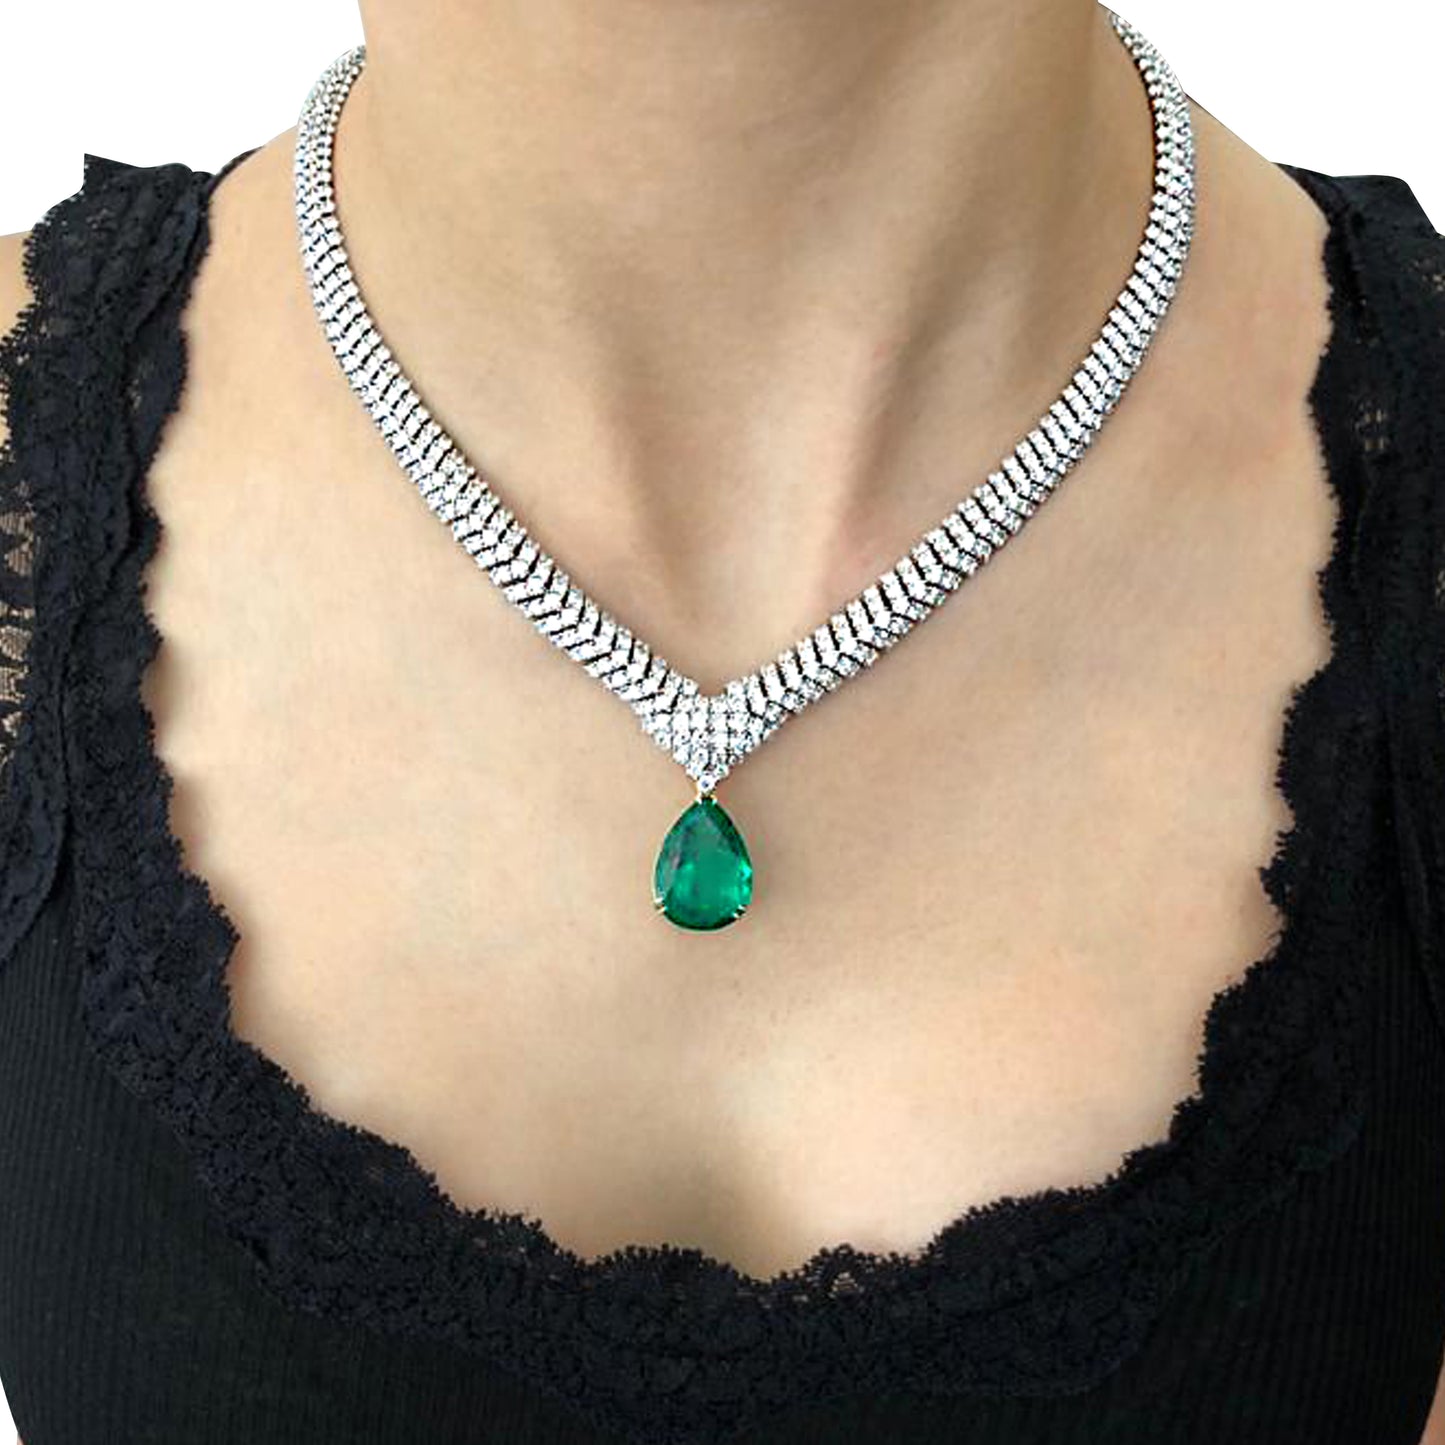 1990s 18KT White Gold Colombian Emerald & Diamond Necklace worn on neck